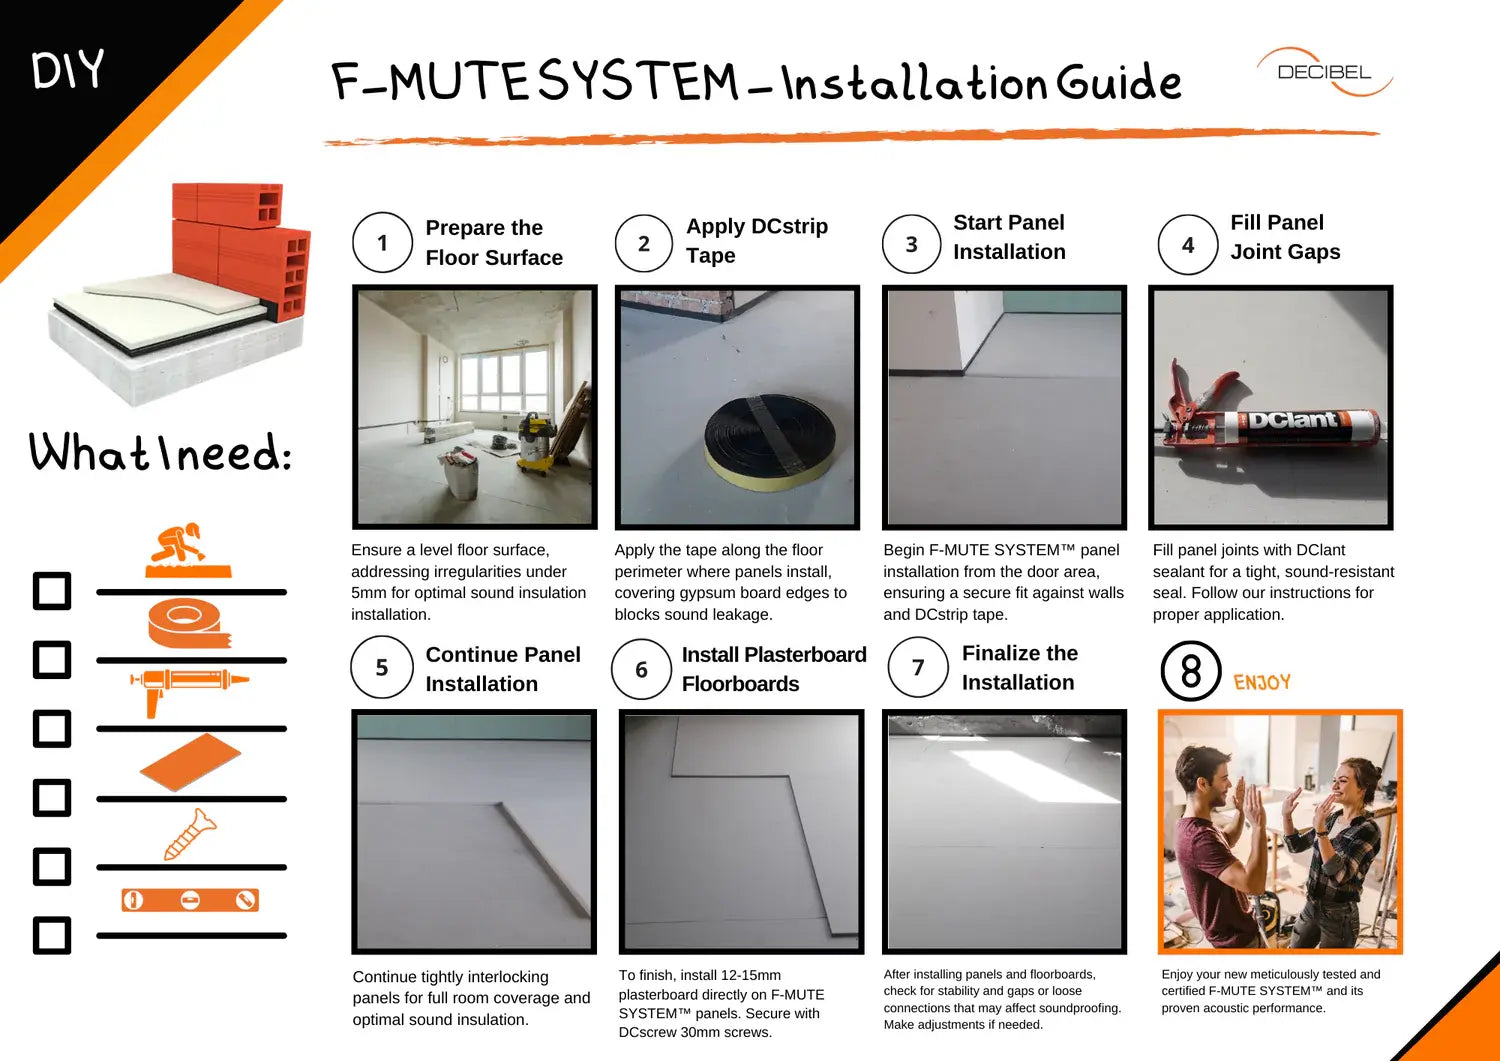 F-MUTE Floor Soundproofing system installation guide